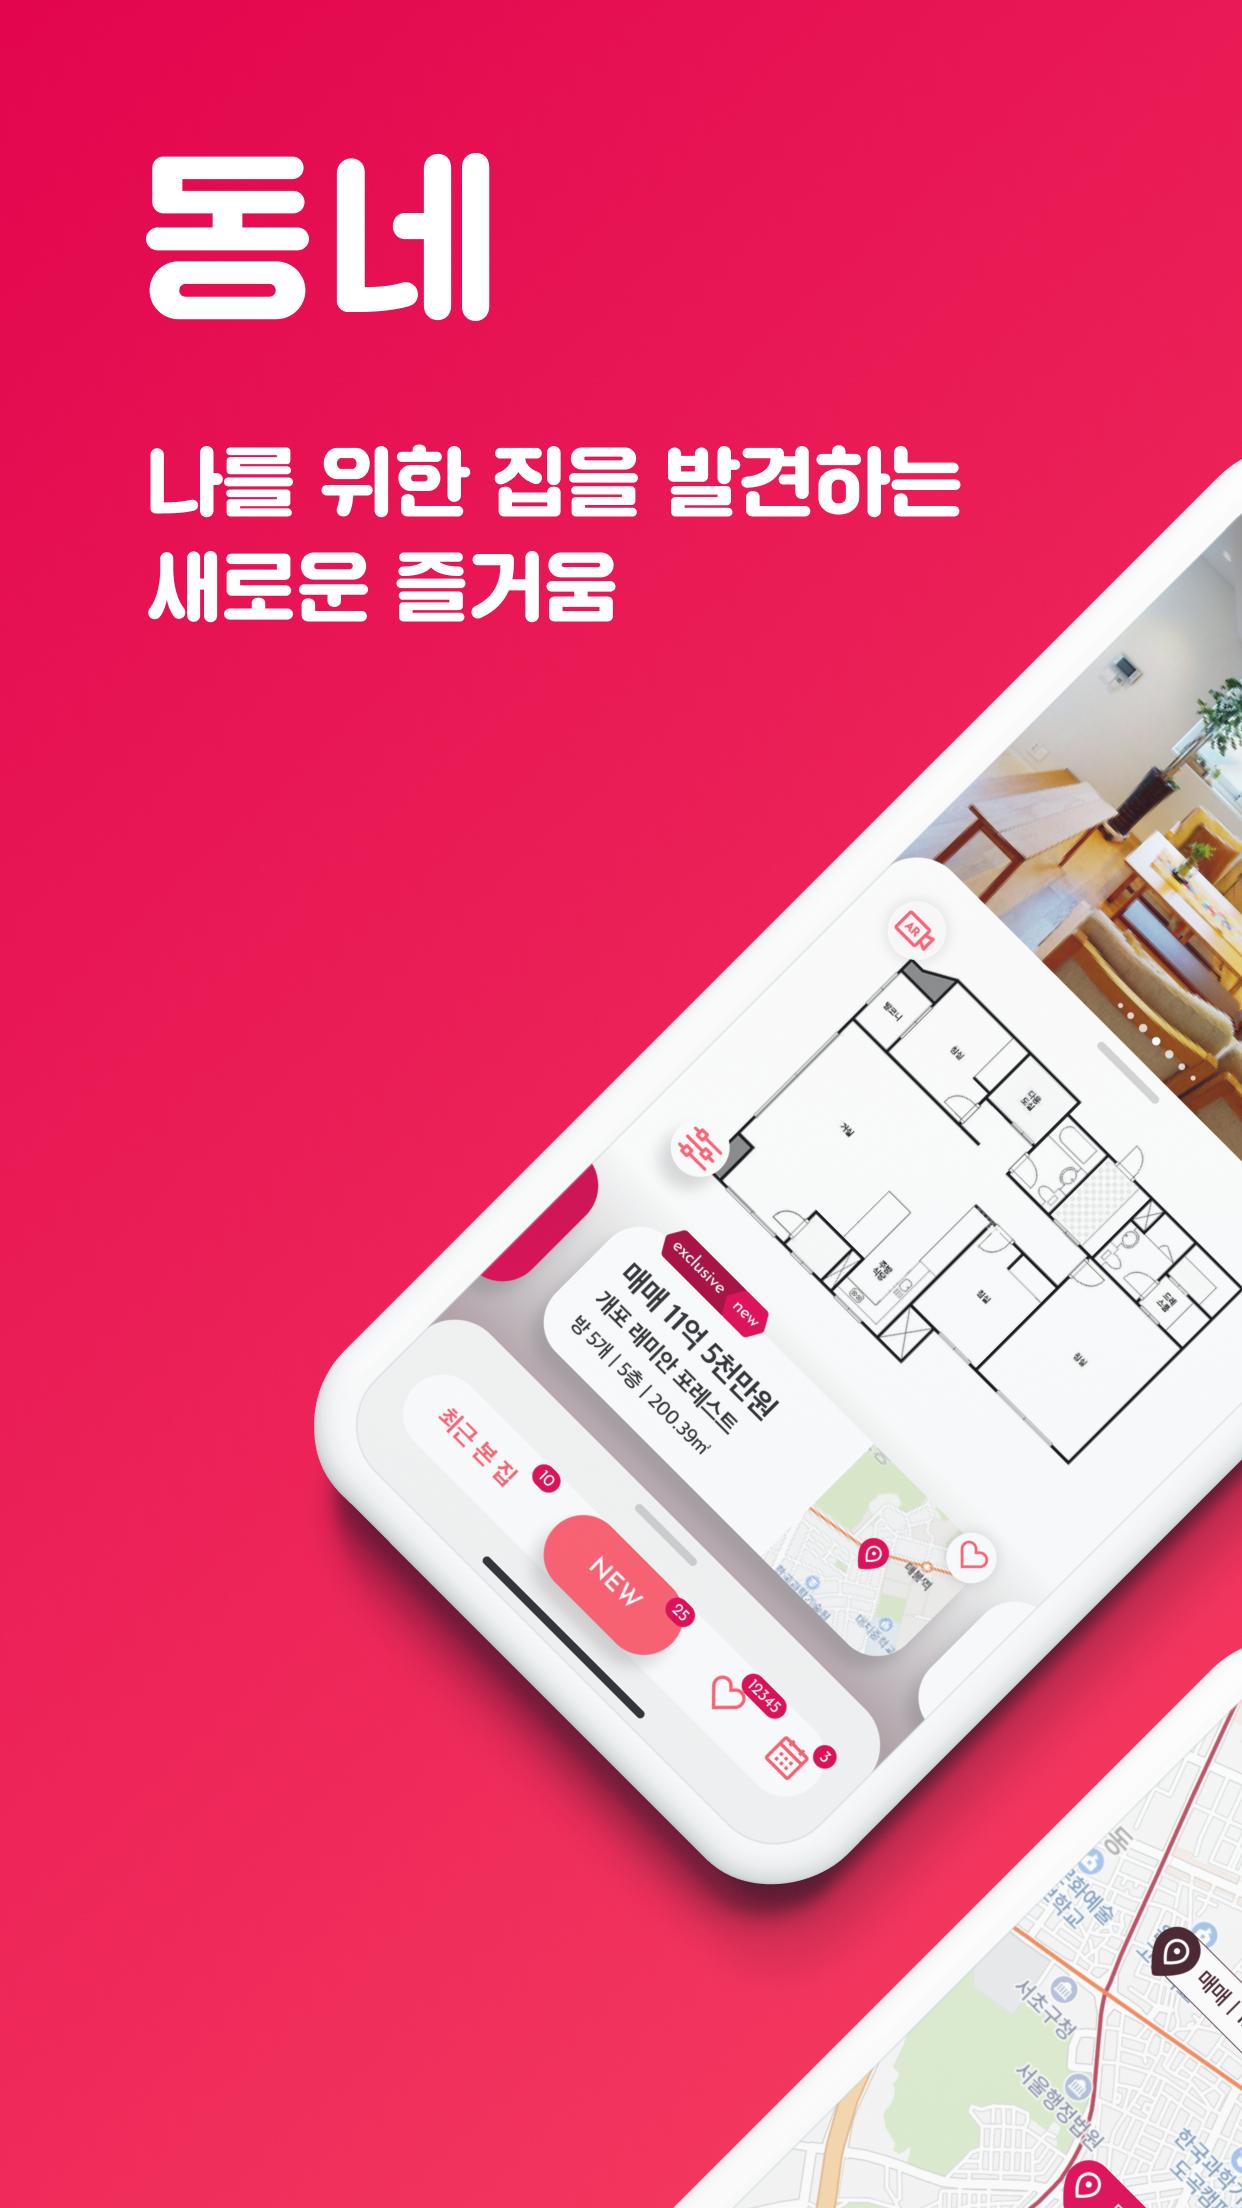 Dongnae Real Estate: Find Your Home 1.0.2 Screenshot 6